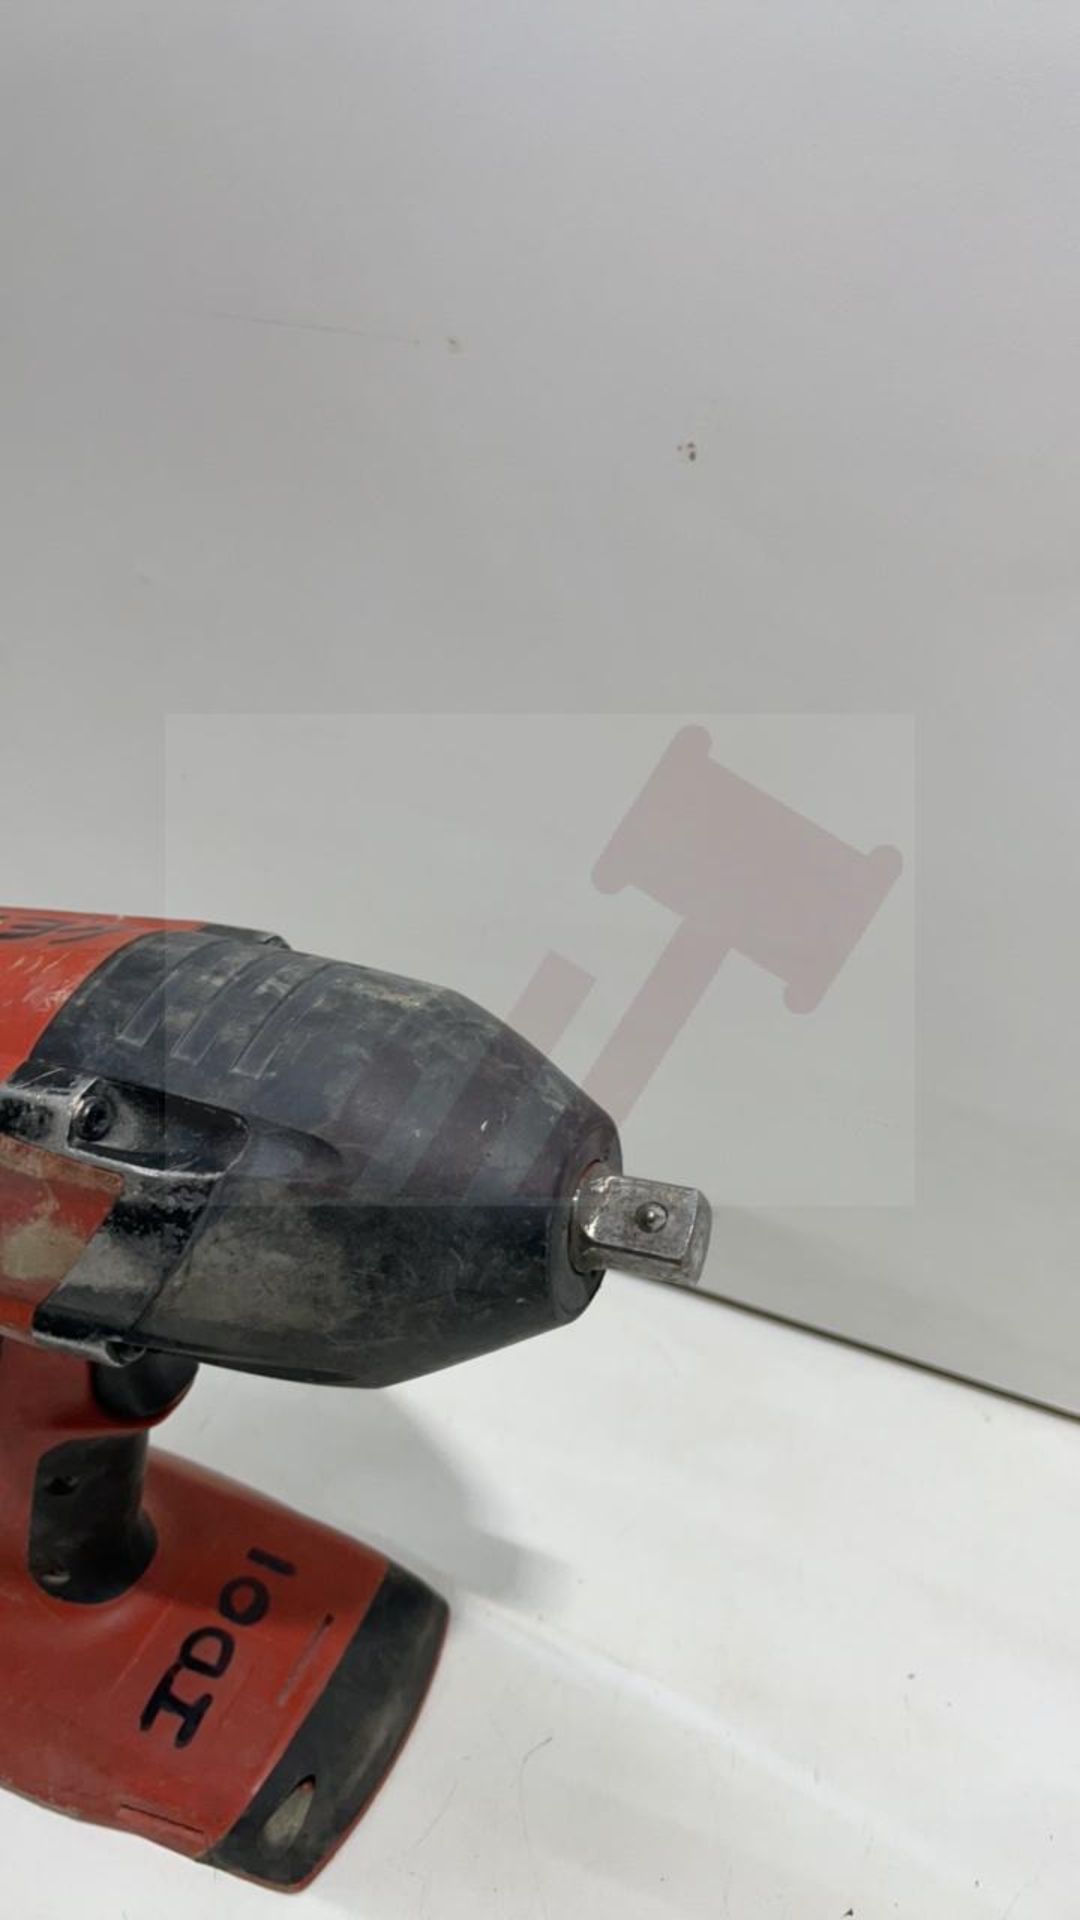 SIW 22T-A 1/2" CORDLESS IMPACT WRENCH - Image 3 of 5